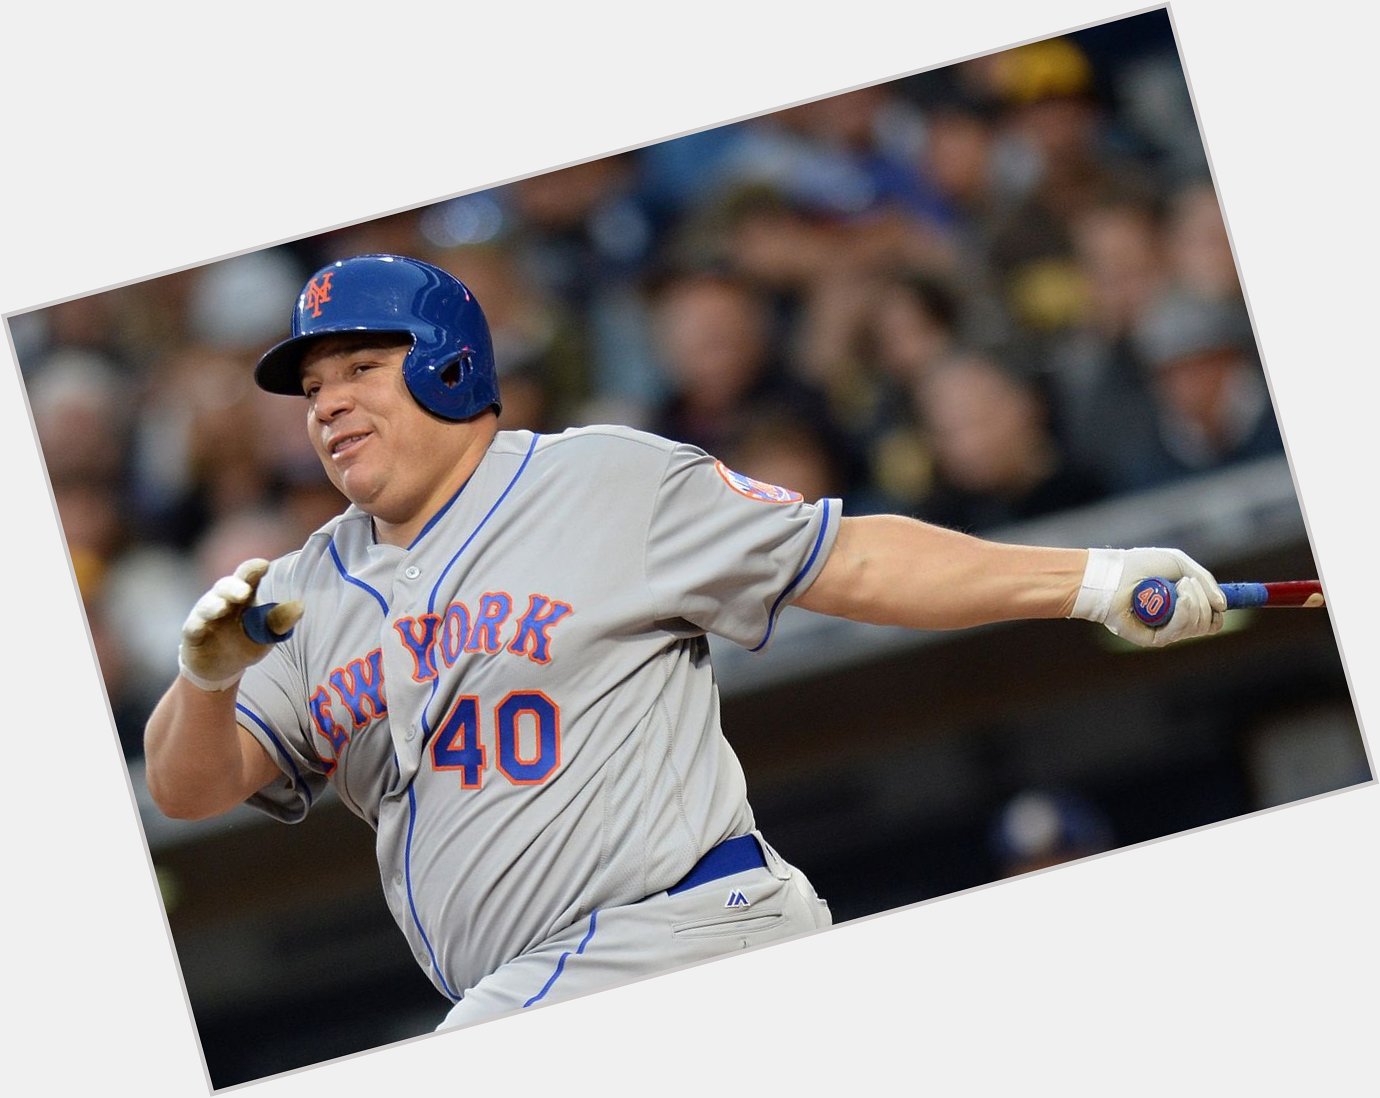 Happy birthday to the greatest athlete of our lifetimes, Bartolo Colon.

Big Sexy is 46! 